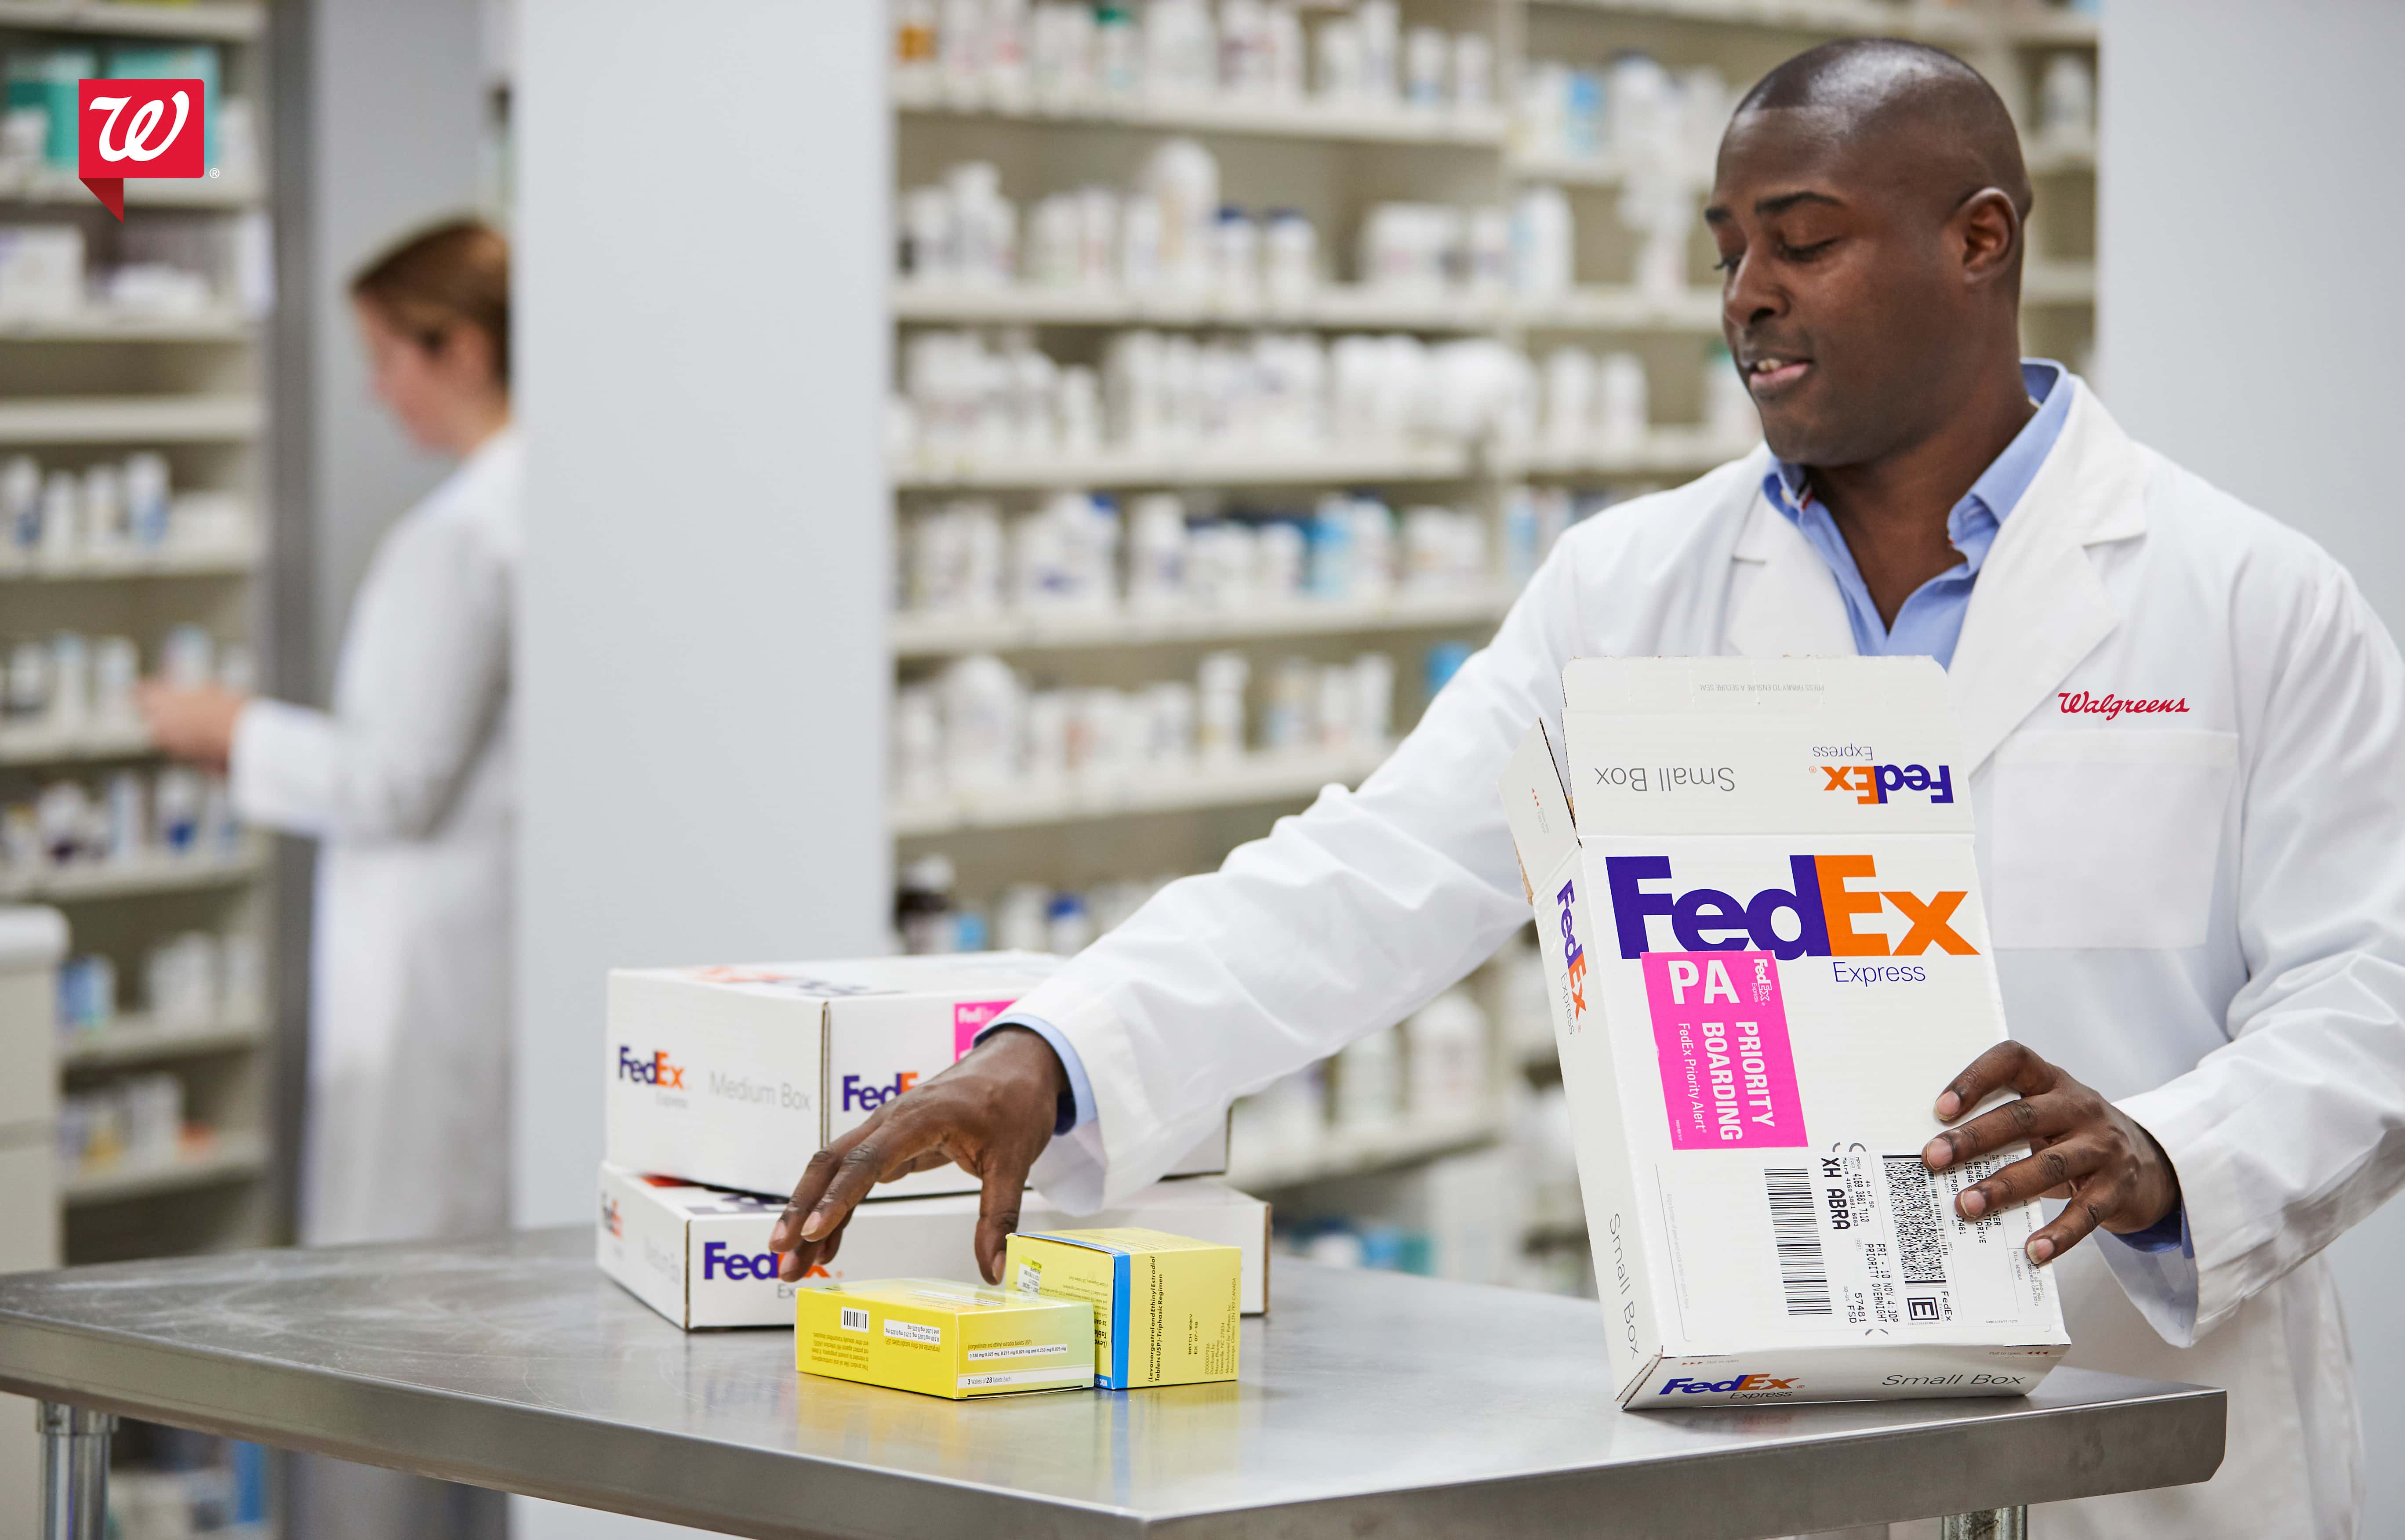 New Walgreens Fedex Partnership Creates Fastest Next Day Delivery